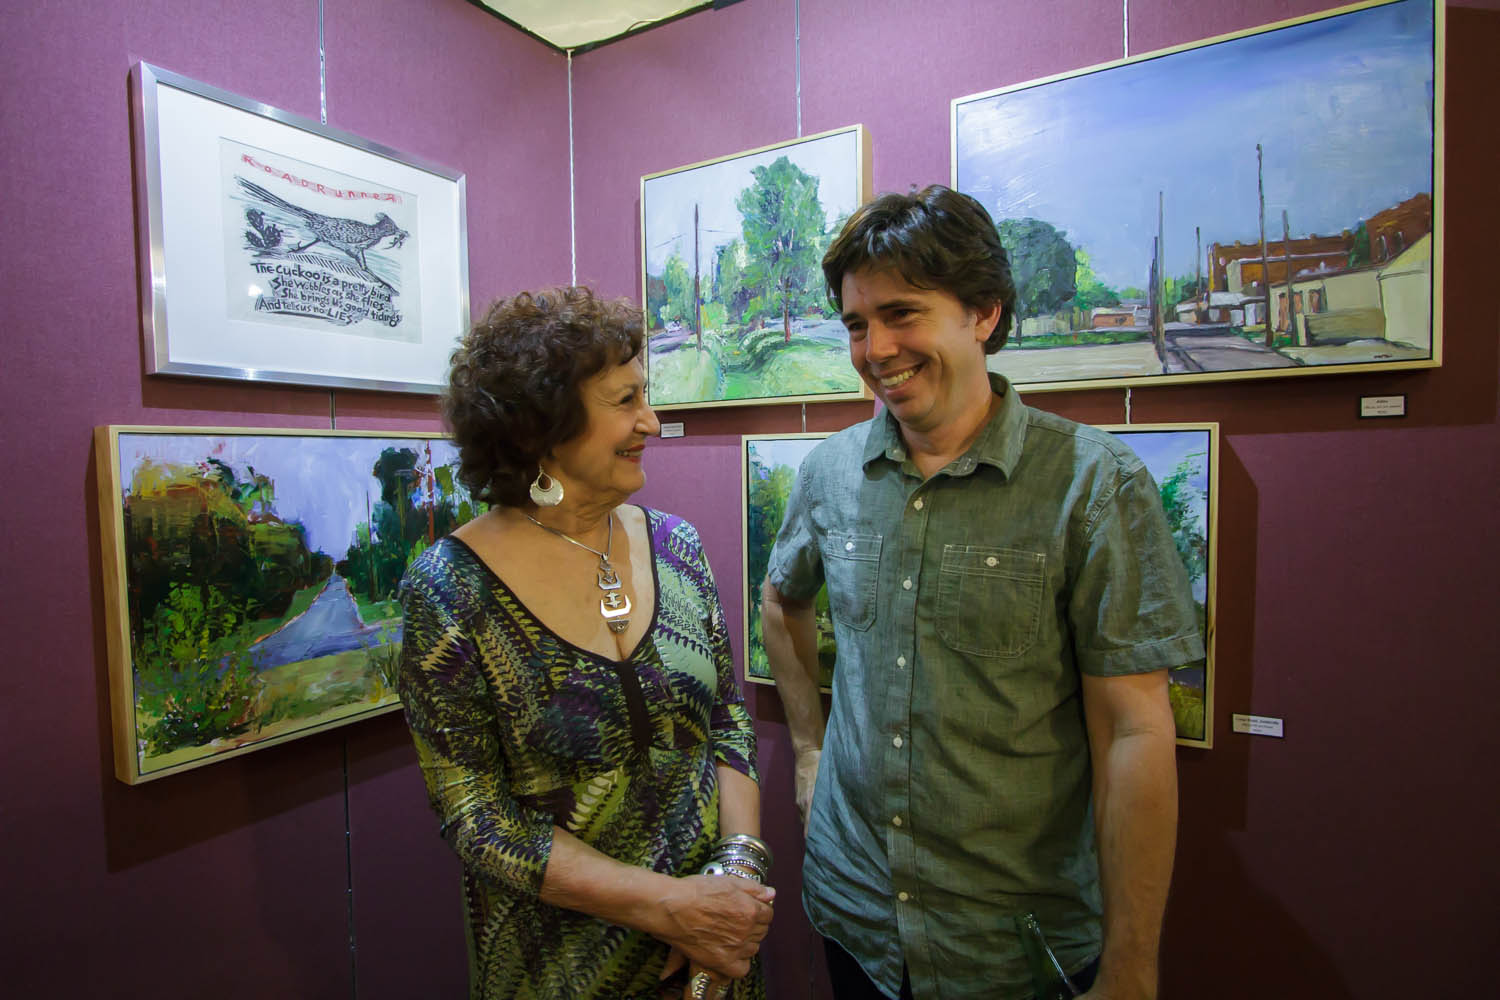 Chris Chappell & Barbara Whitehead at show opening